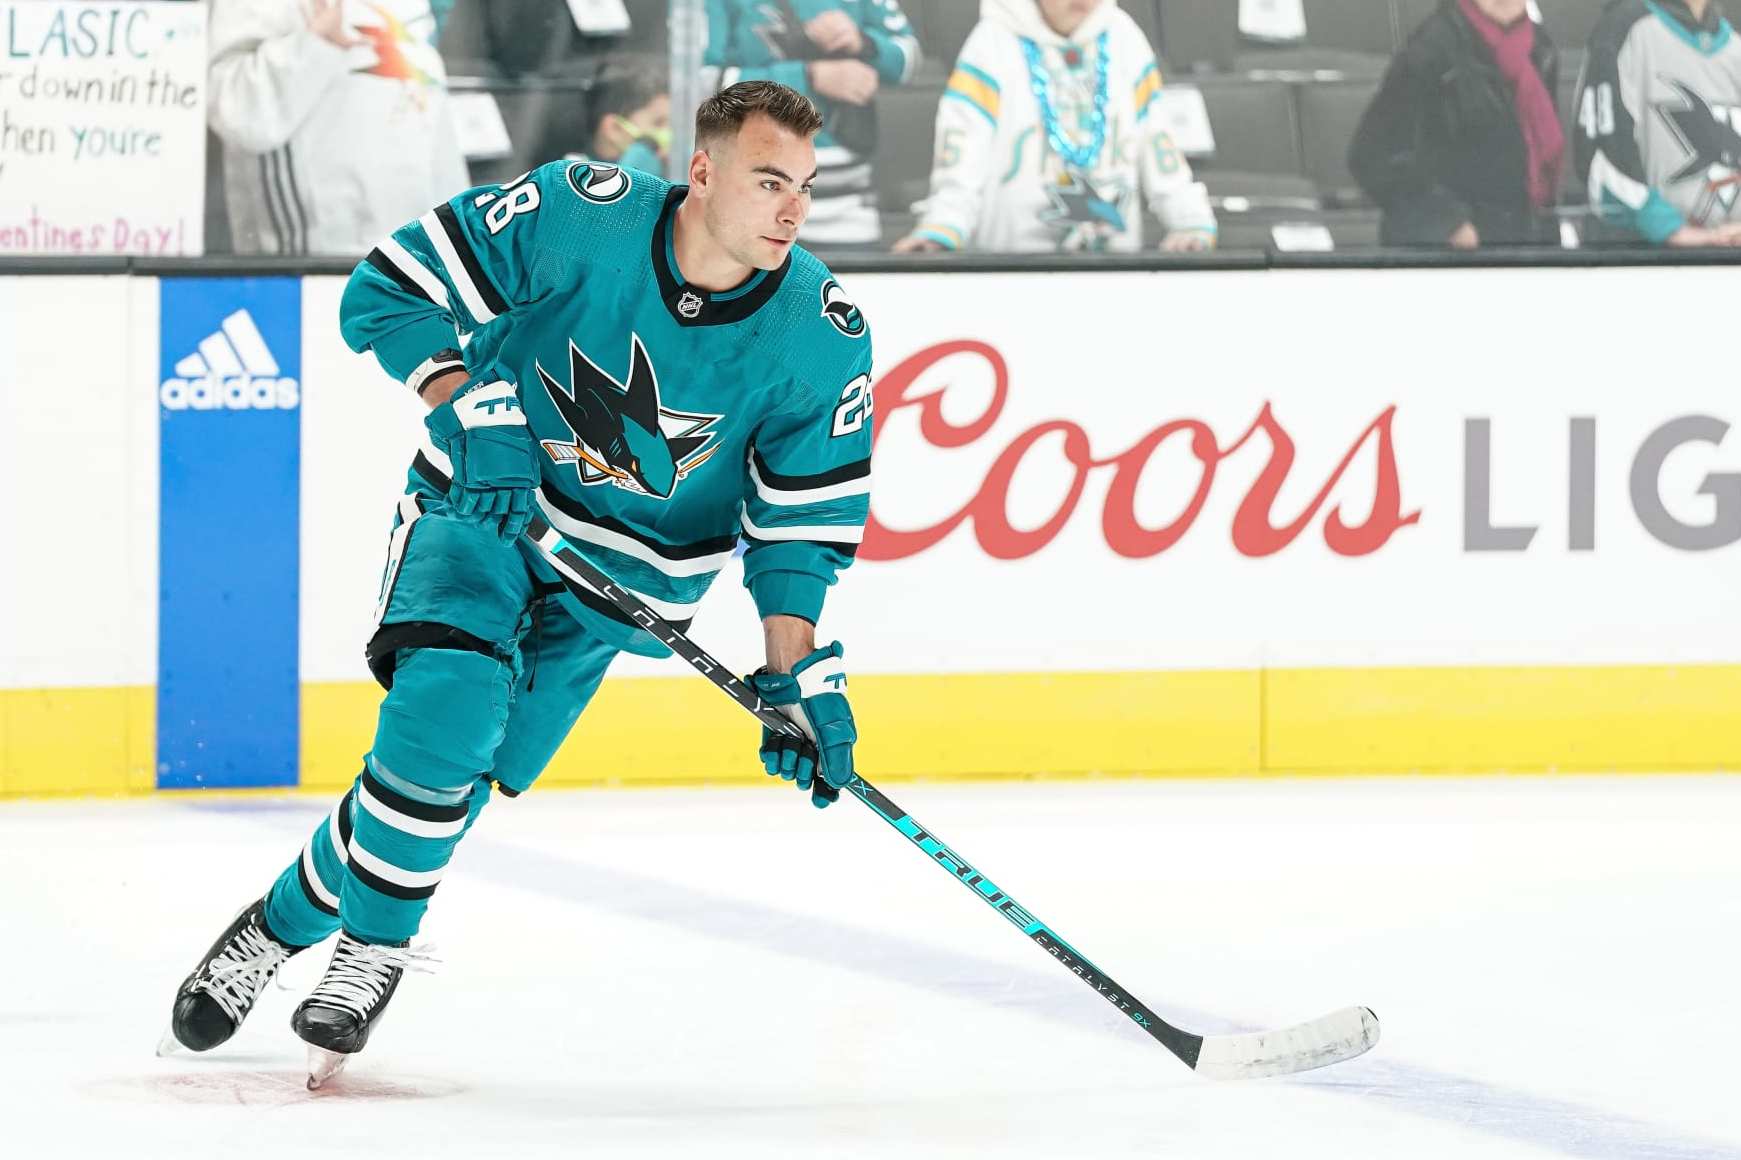 Ex-Sharks star Timo Meier scores goal to help Devils win in his debut – NBC  Sports Bay Area & California